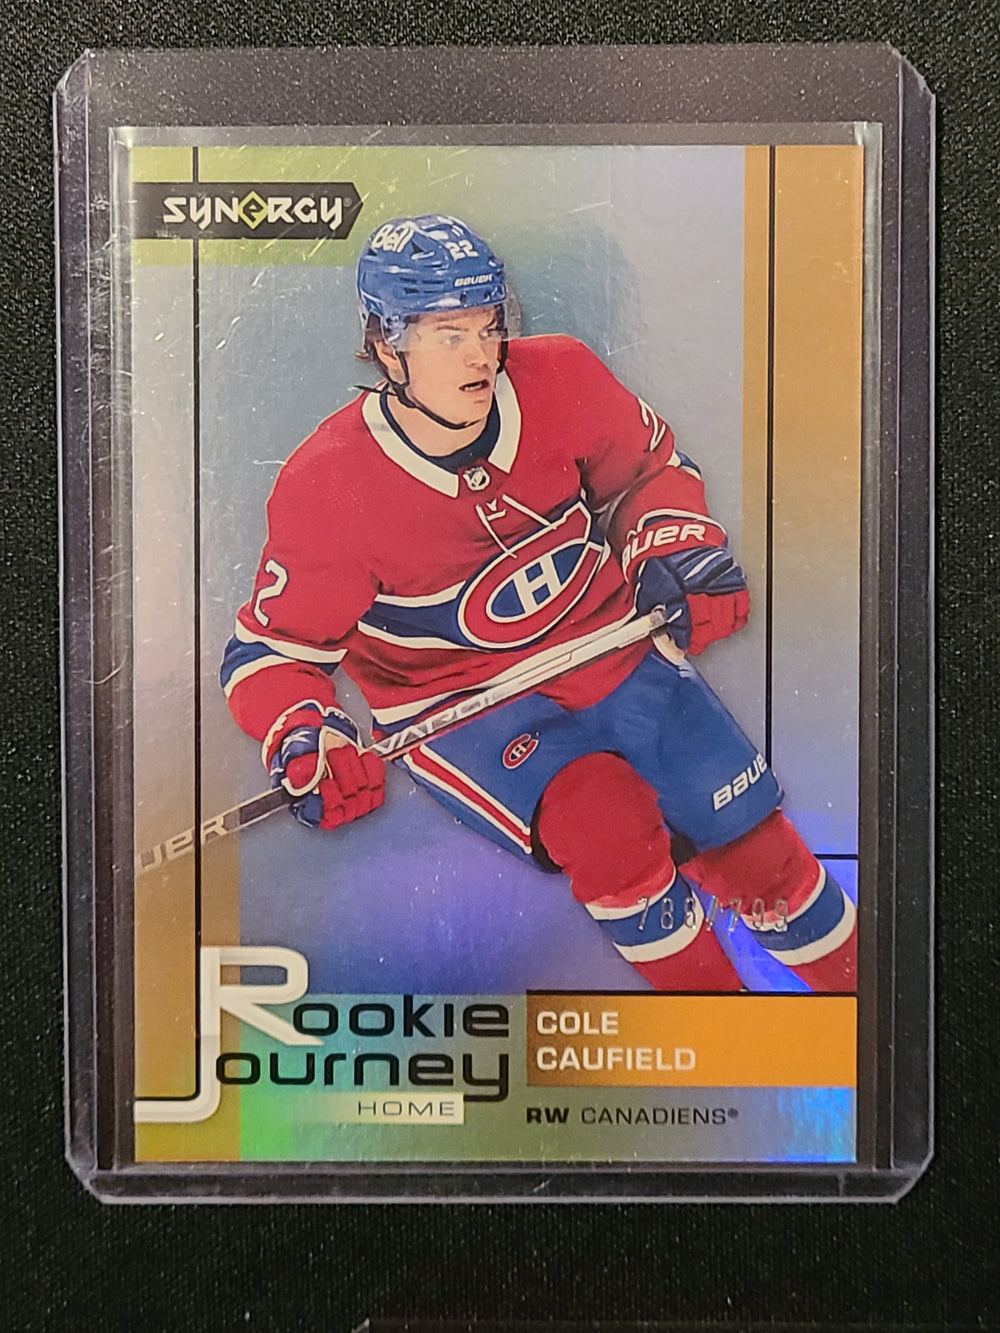 2021-22 Synergy Rookie Journey Home #RJ-5 Cole Caufield Montreal Canadiens 788/799